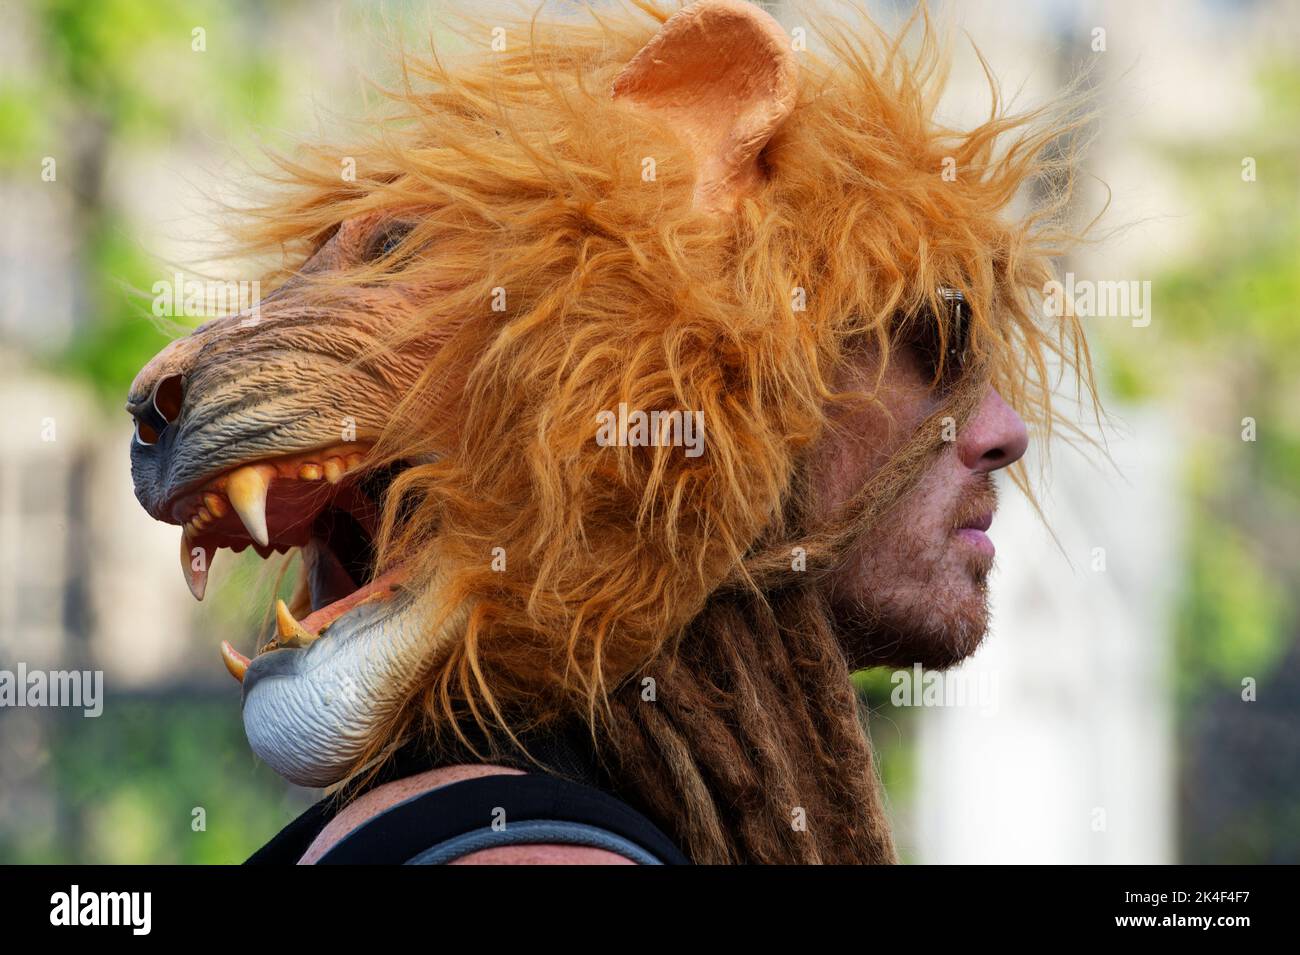 London. People protest against the oil industry and the cost of living crisis. A man with dreadlocks wears a lion mask on his head. Stock Photo